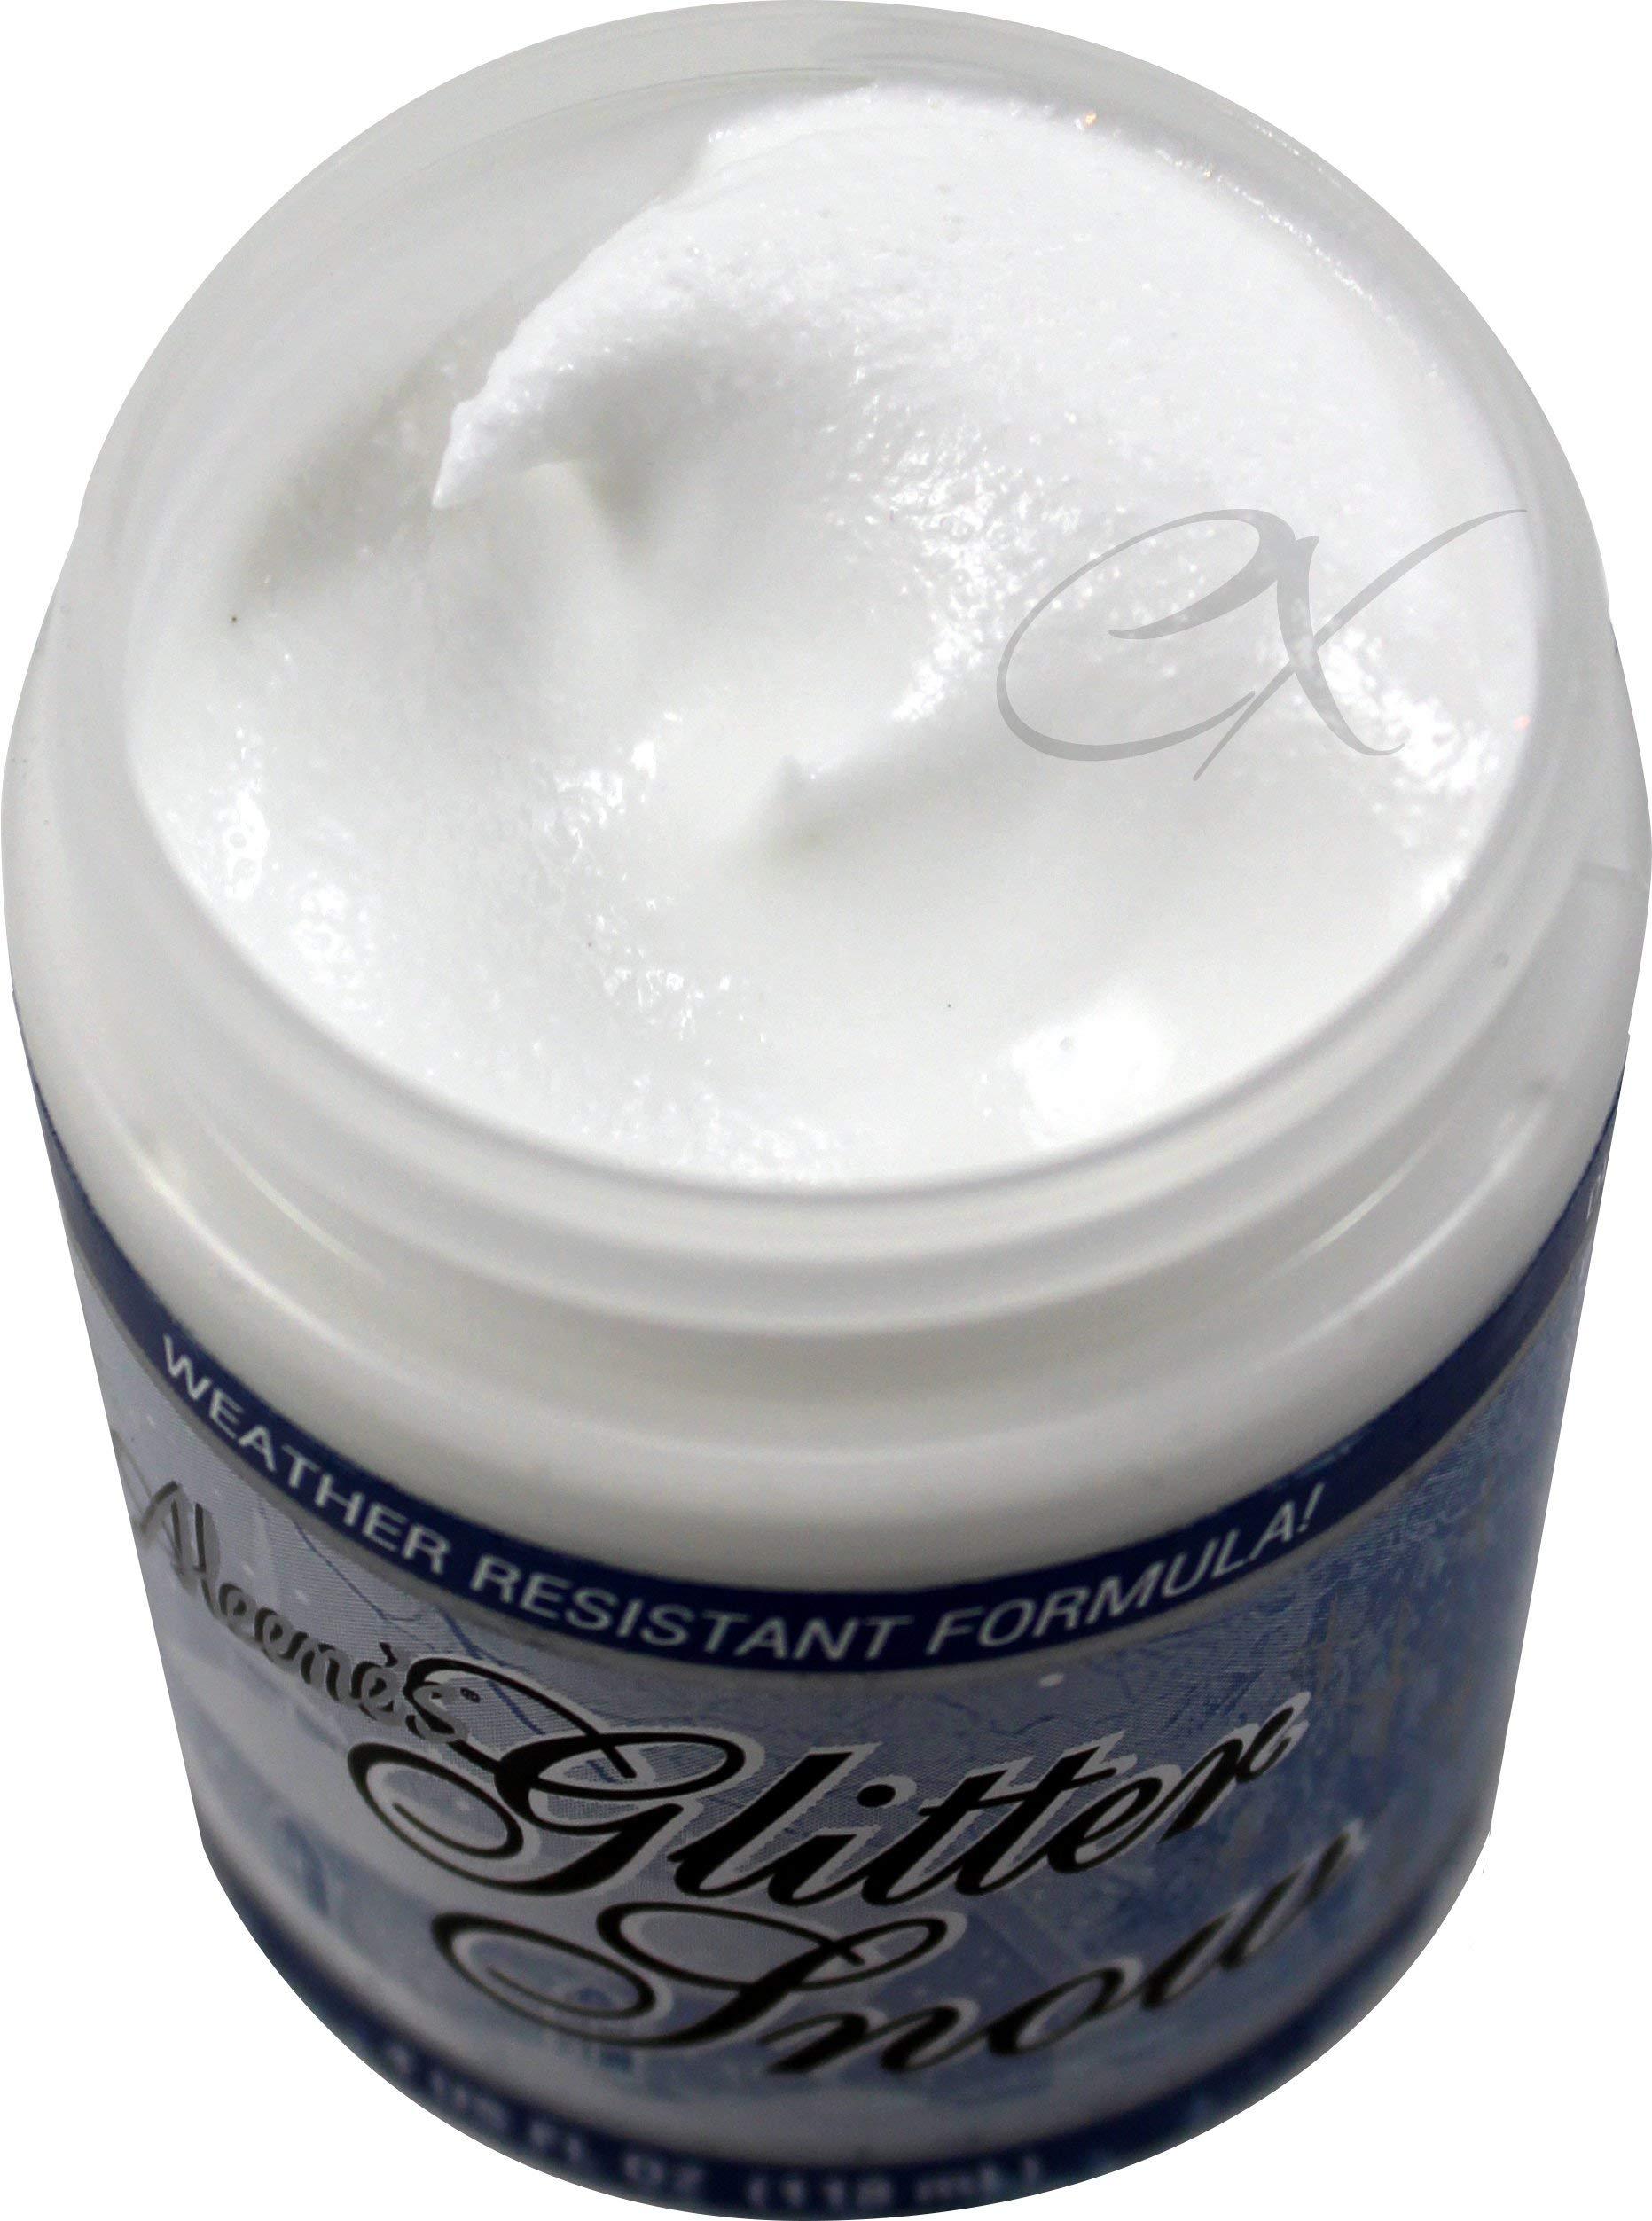 Aleene's Adhesives Bulk Buy Duncan Crafts Snow Glitter Paint 4 Ounces SP408 3-Pack - image 4 of 5